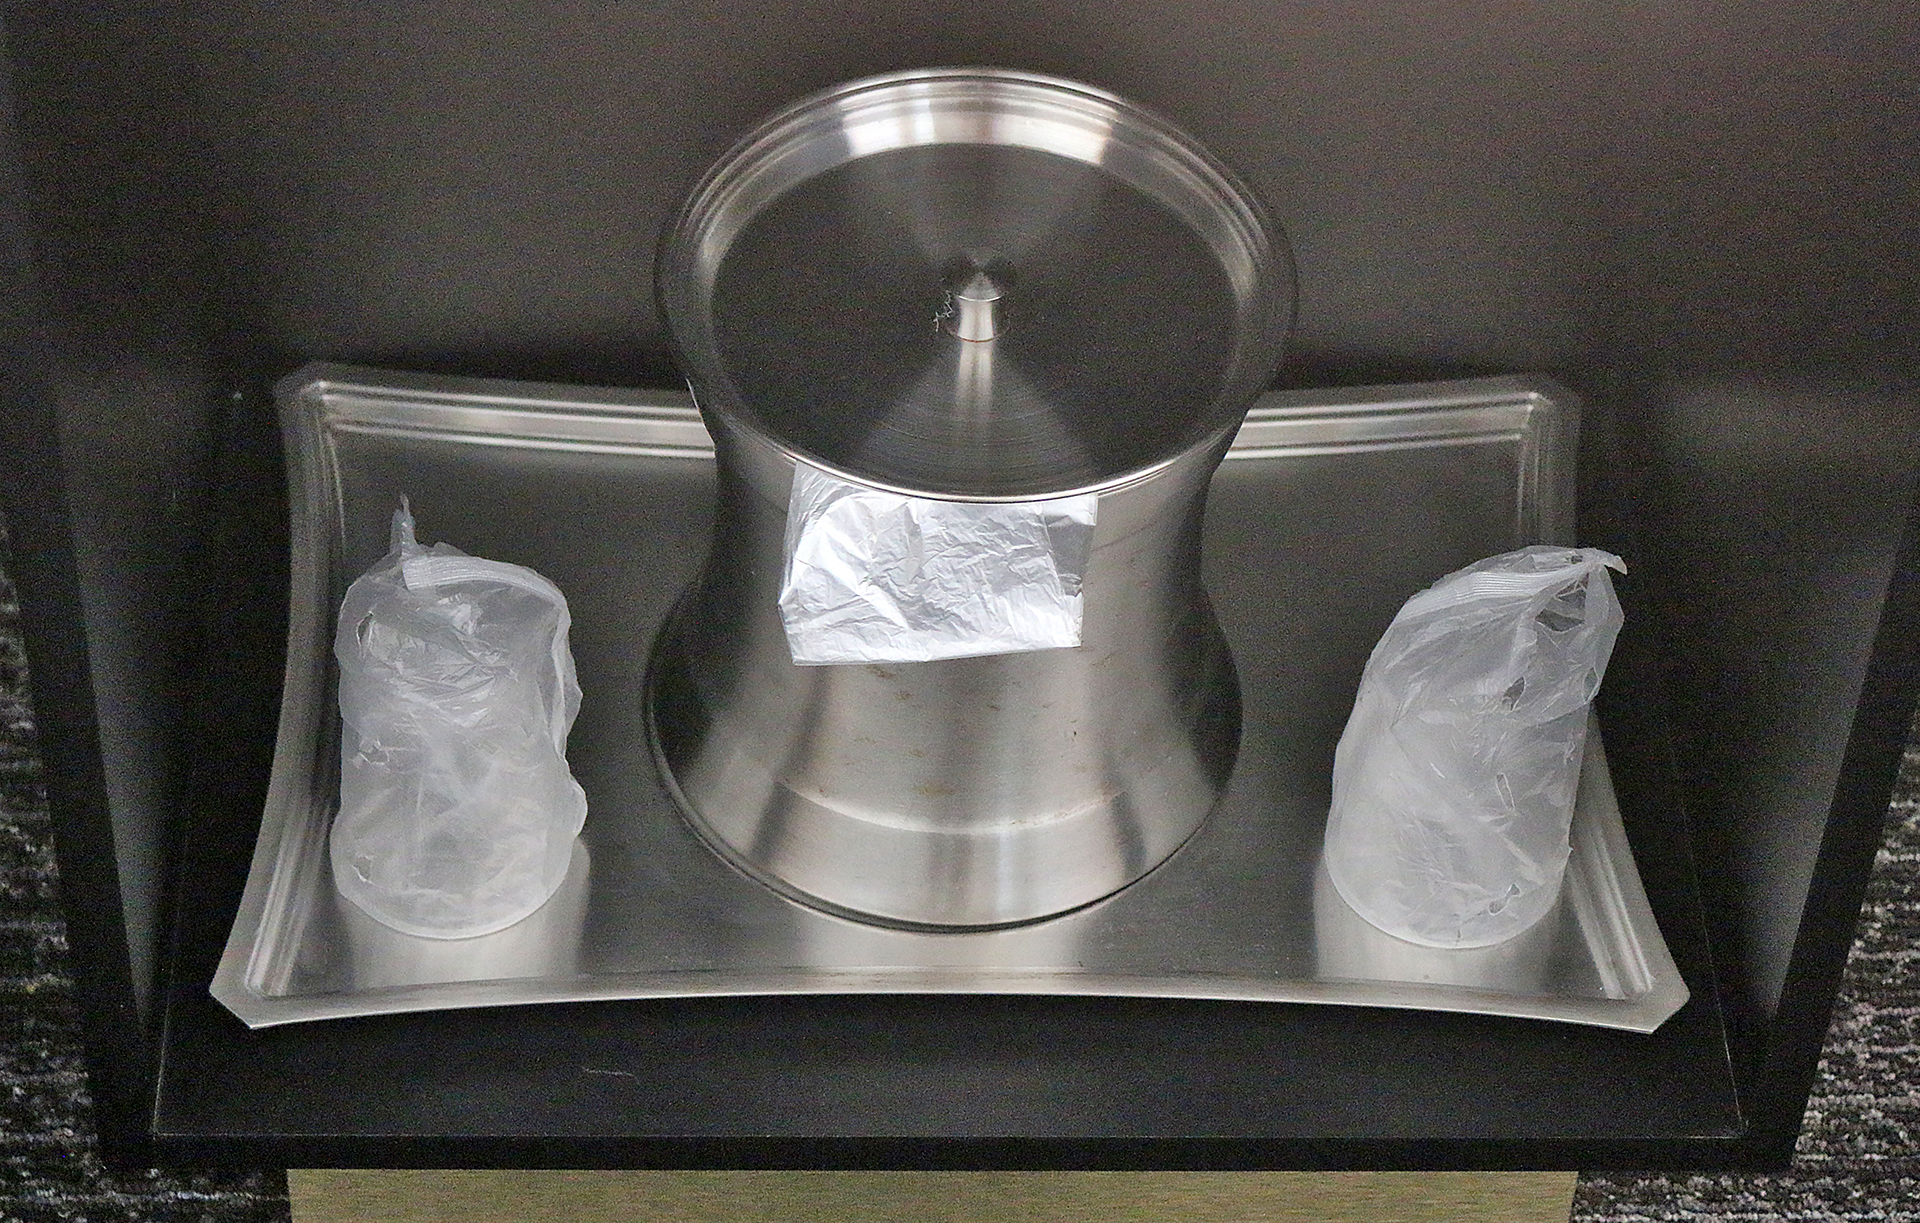 a silver container with plastic bags on a tray